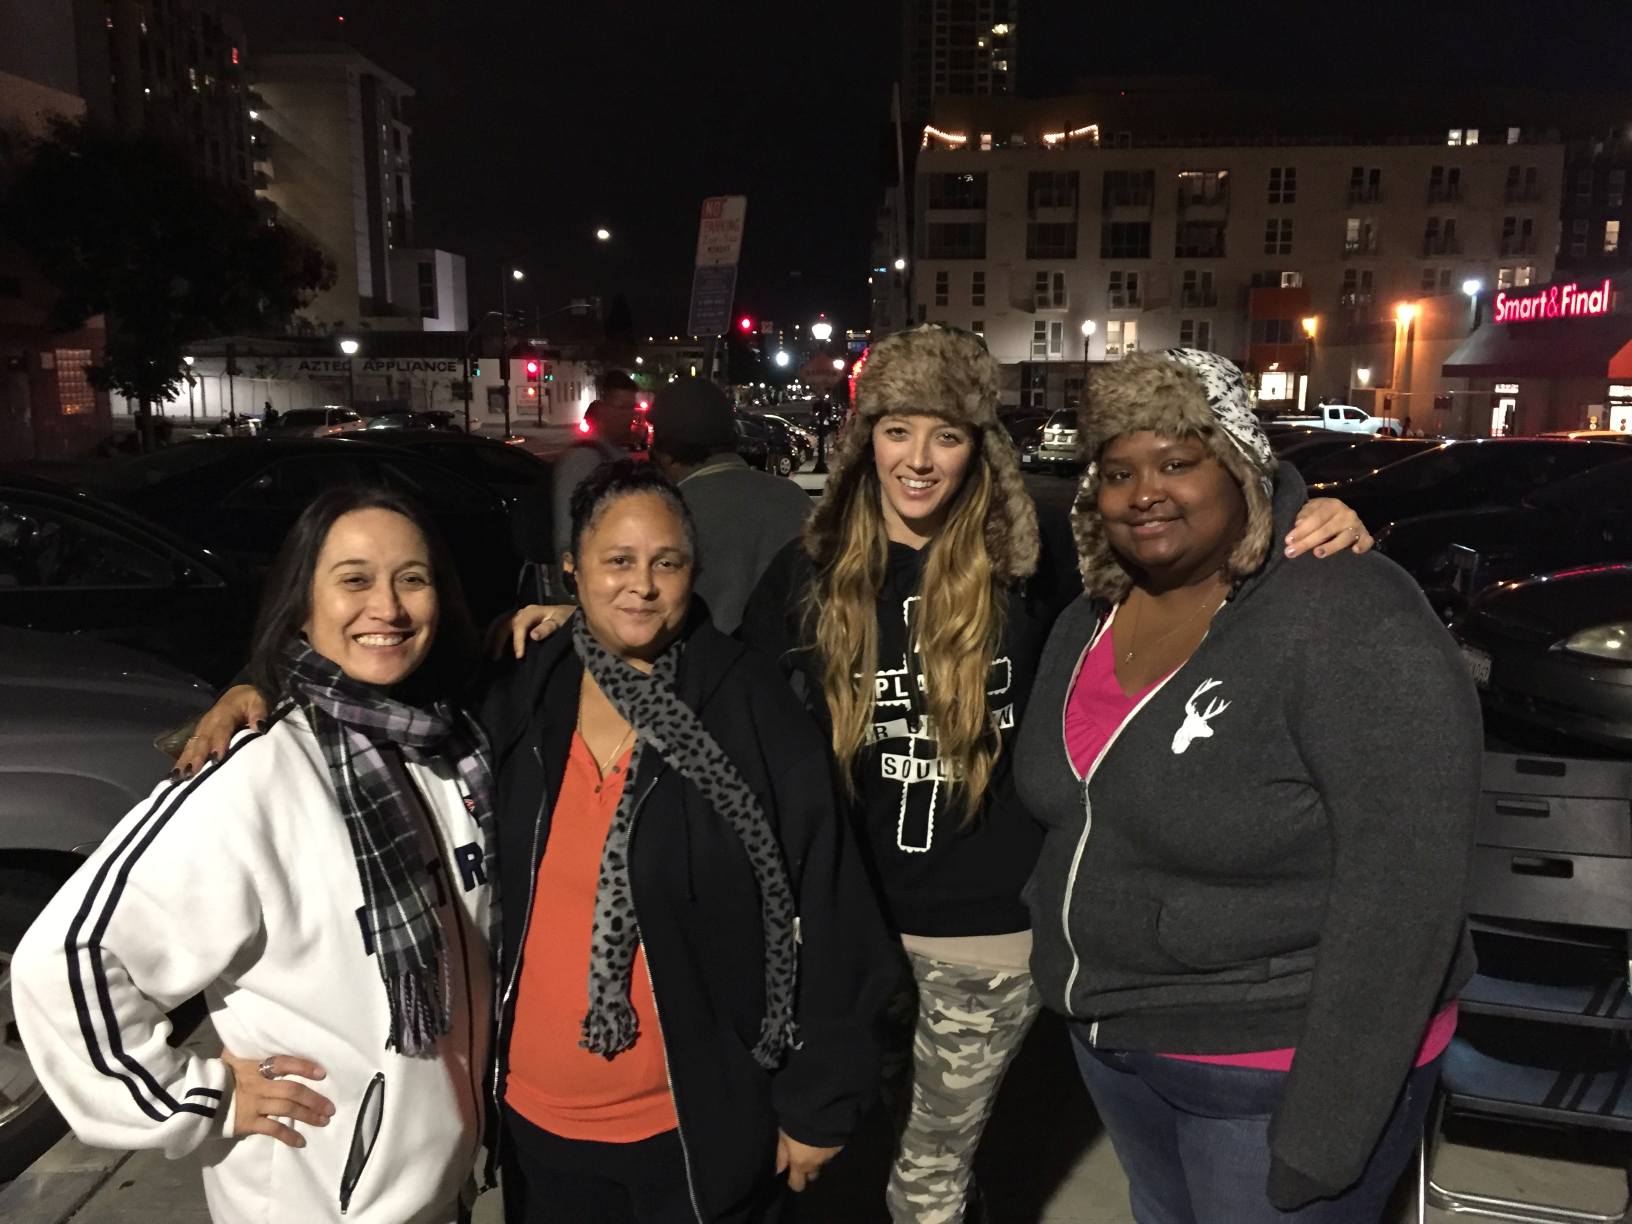 Feed the Homeless for Christmas in Downtown San Diego – Streets of Hope